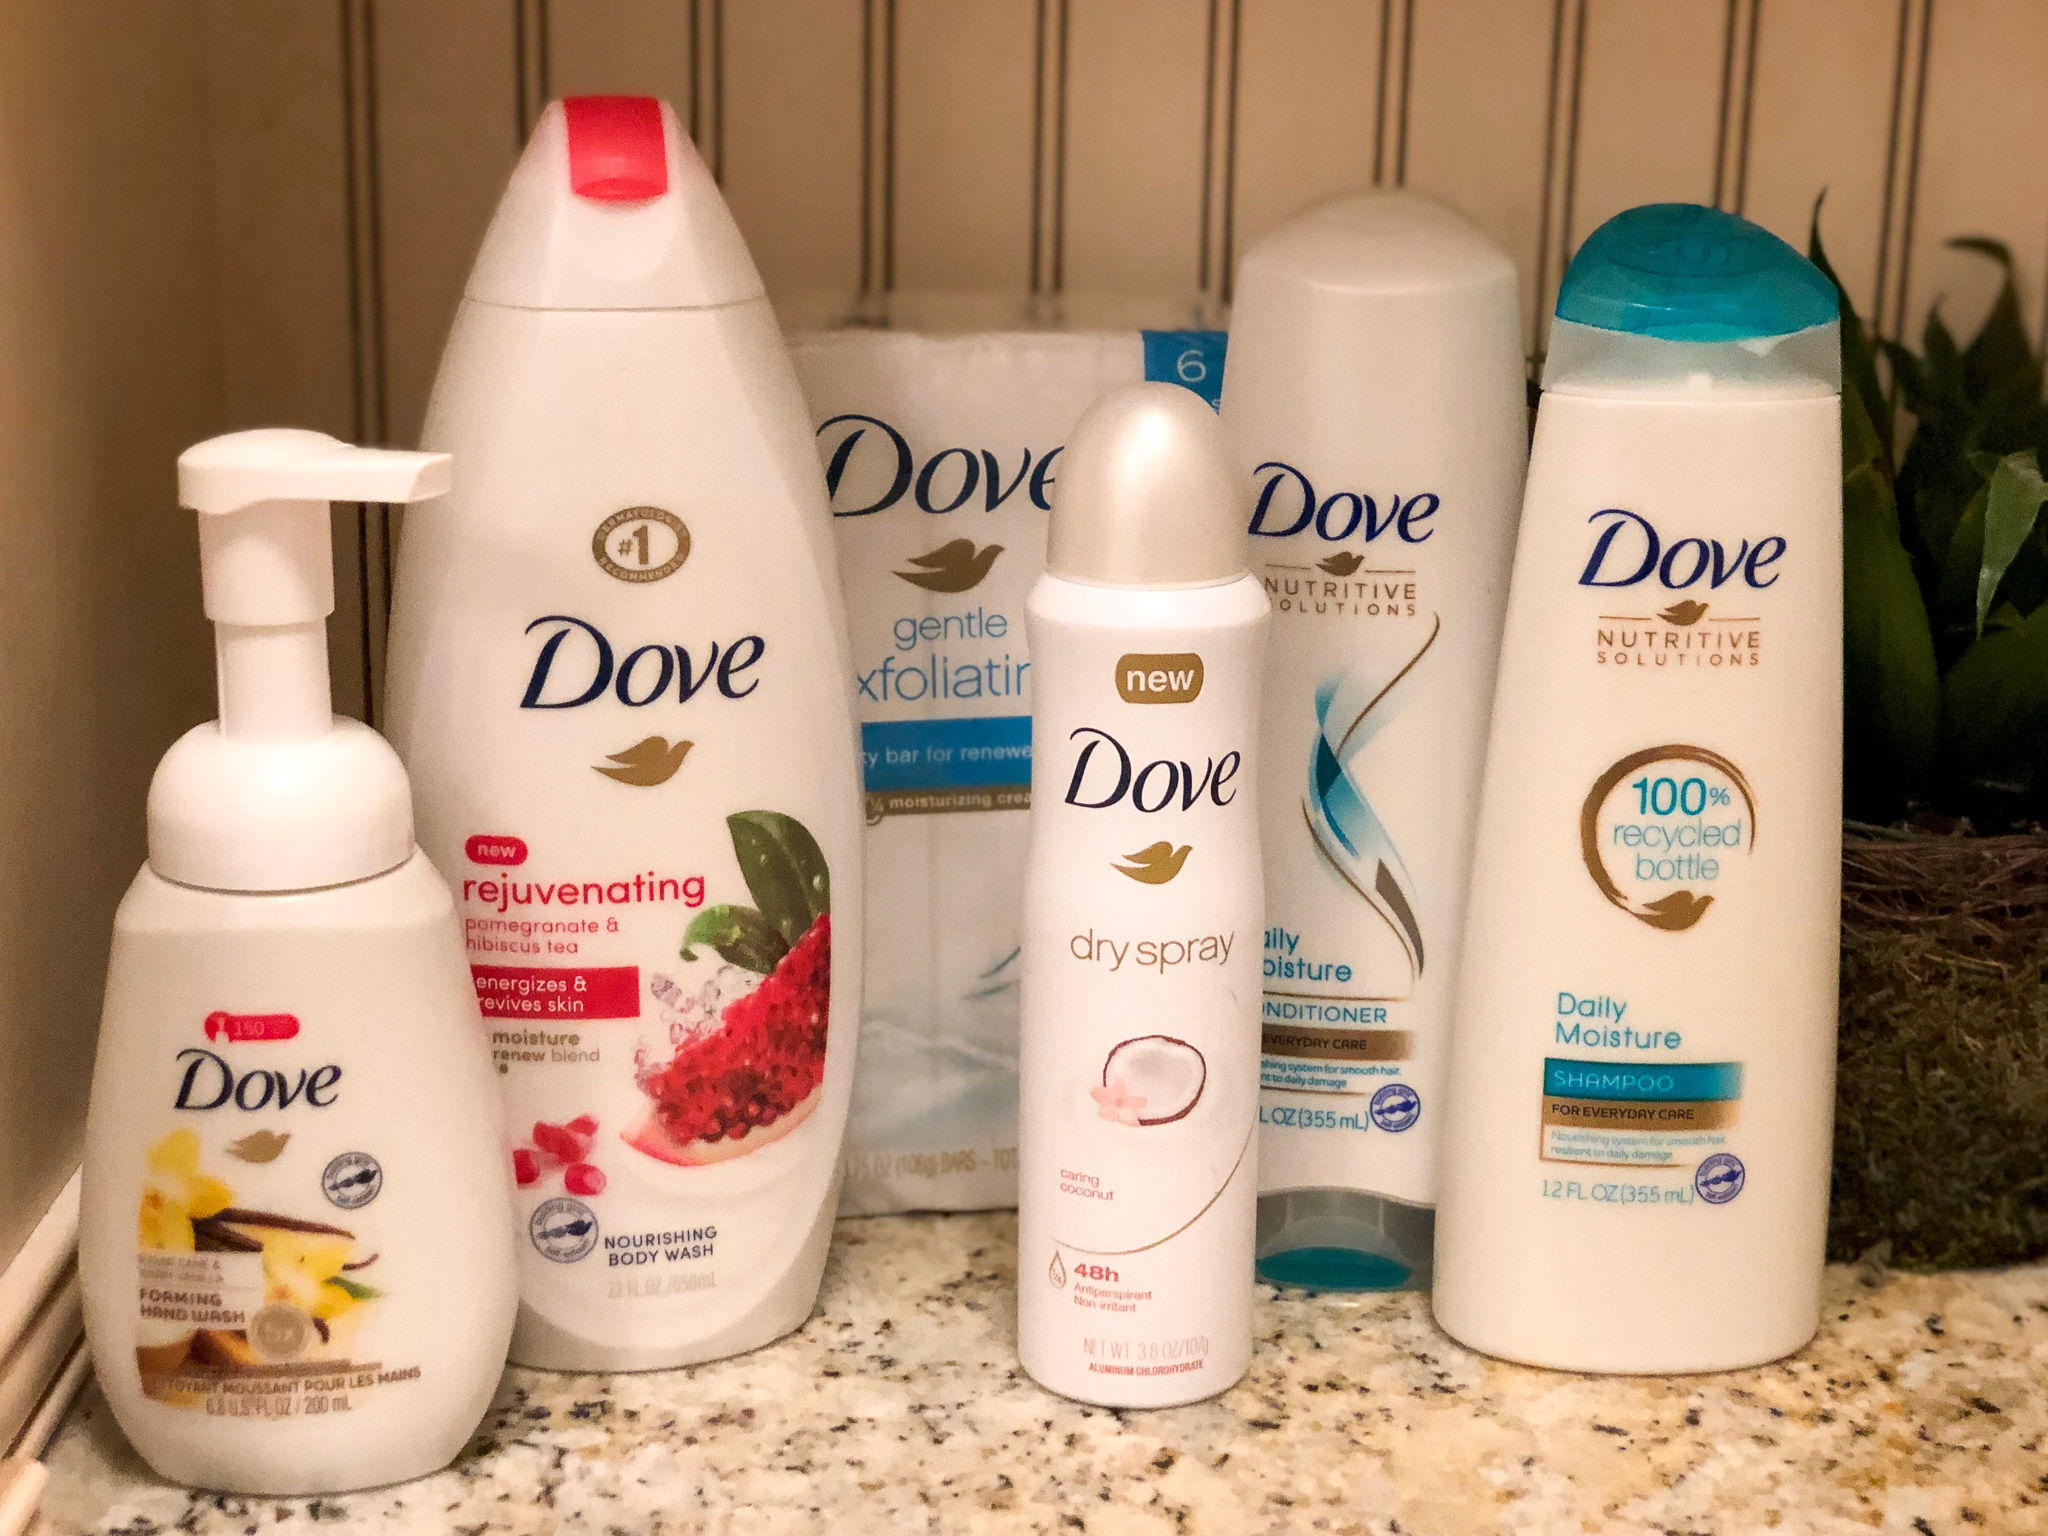 Look And Feel Your Best All Season Long - Pick Up Great Deals On Unilever Personal Care Products & Save Now At Publix on I Heart Publix